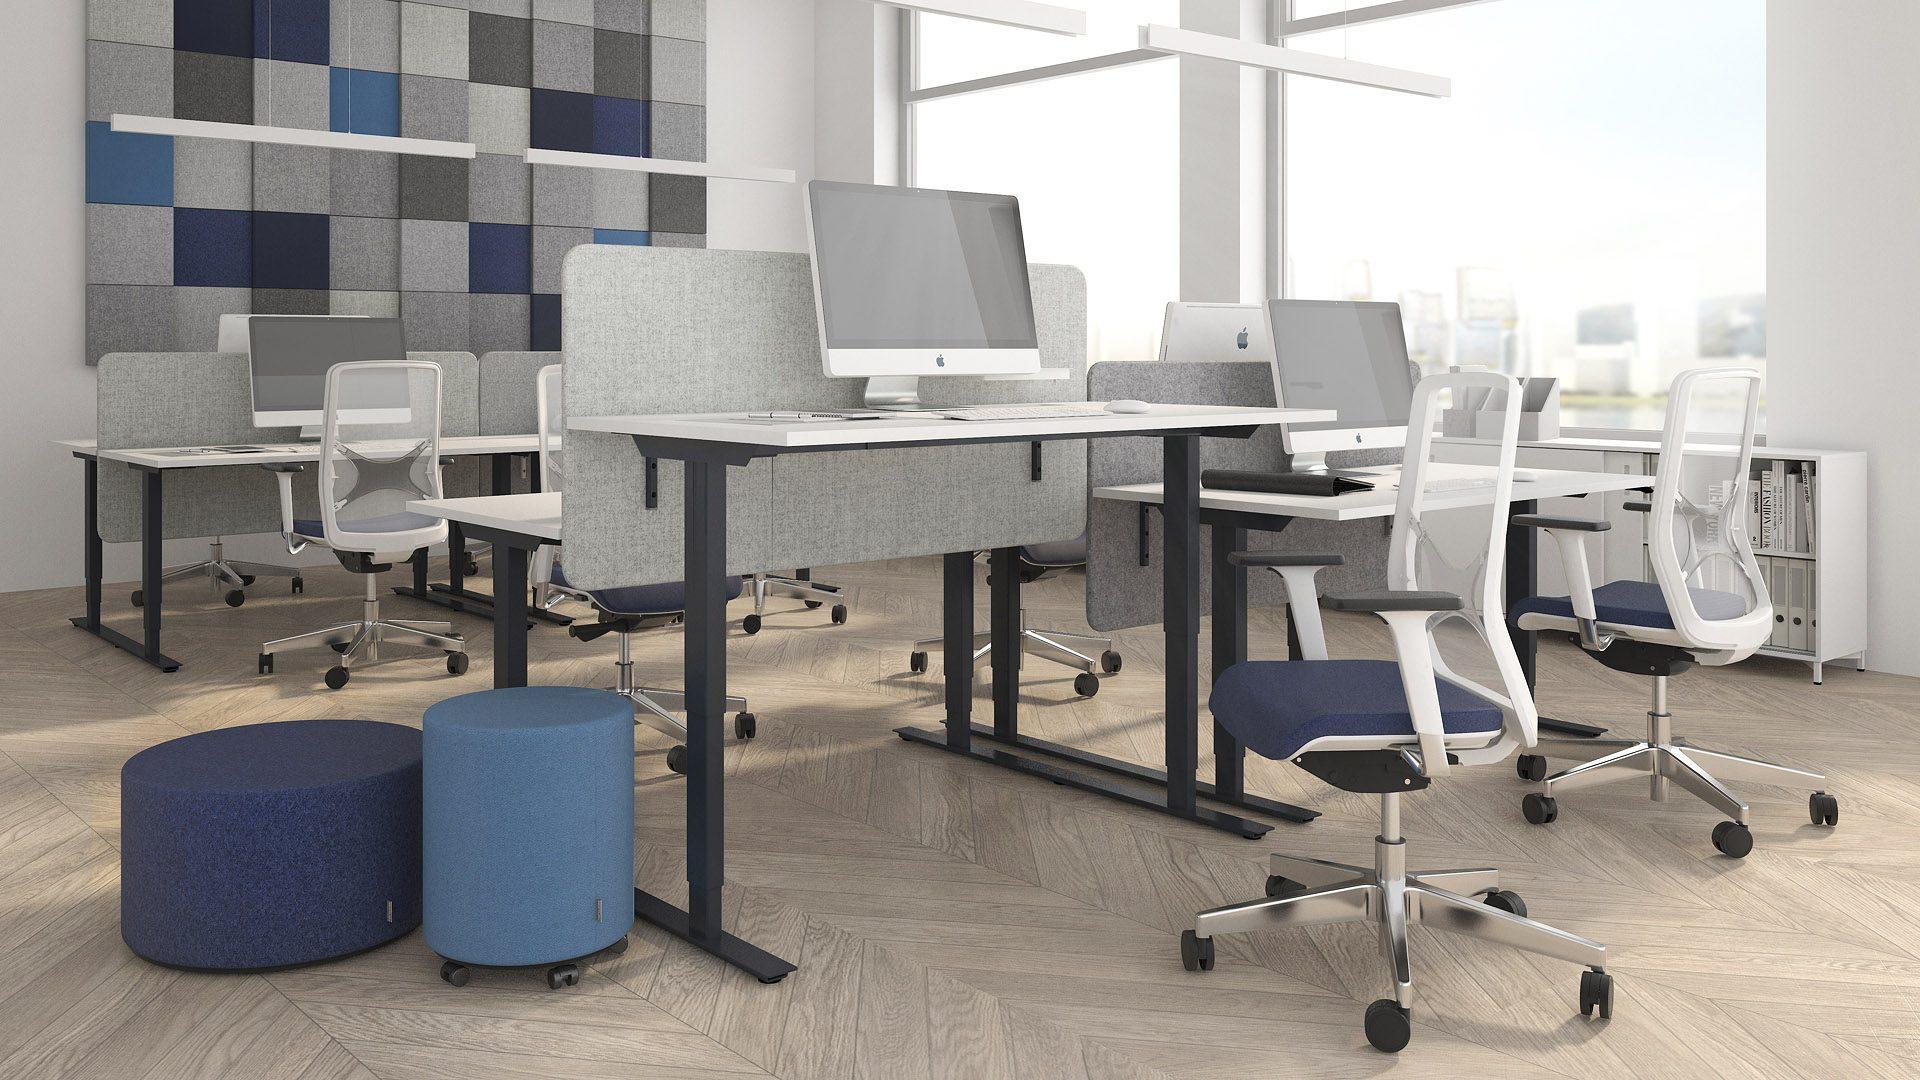 Easy screens are compatible with Active, Easy, One, T-Easy desks, and the whole Nova range